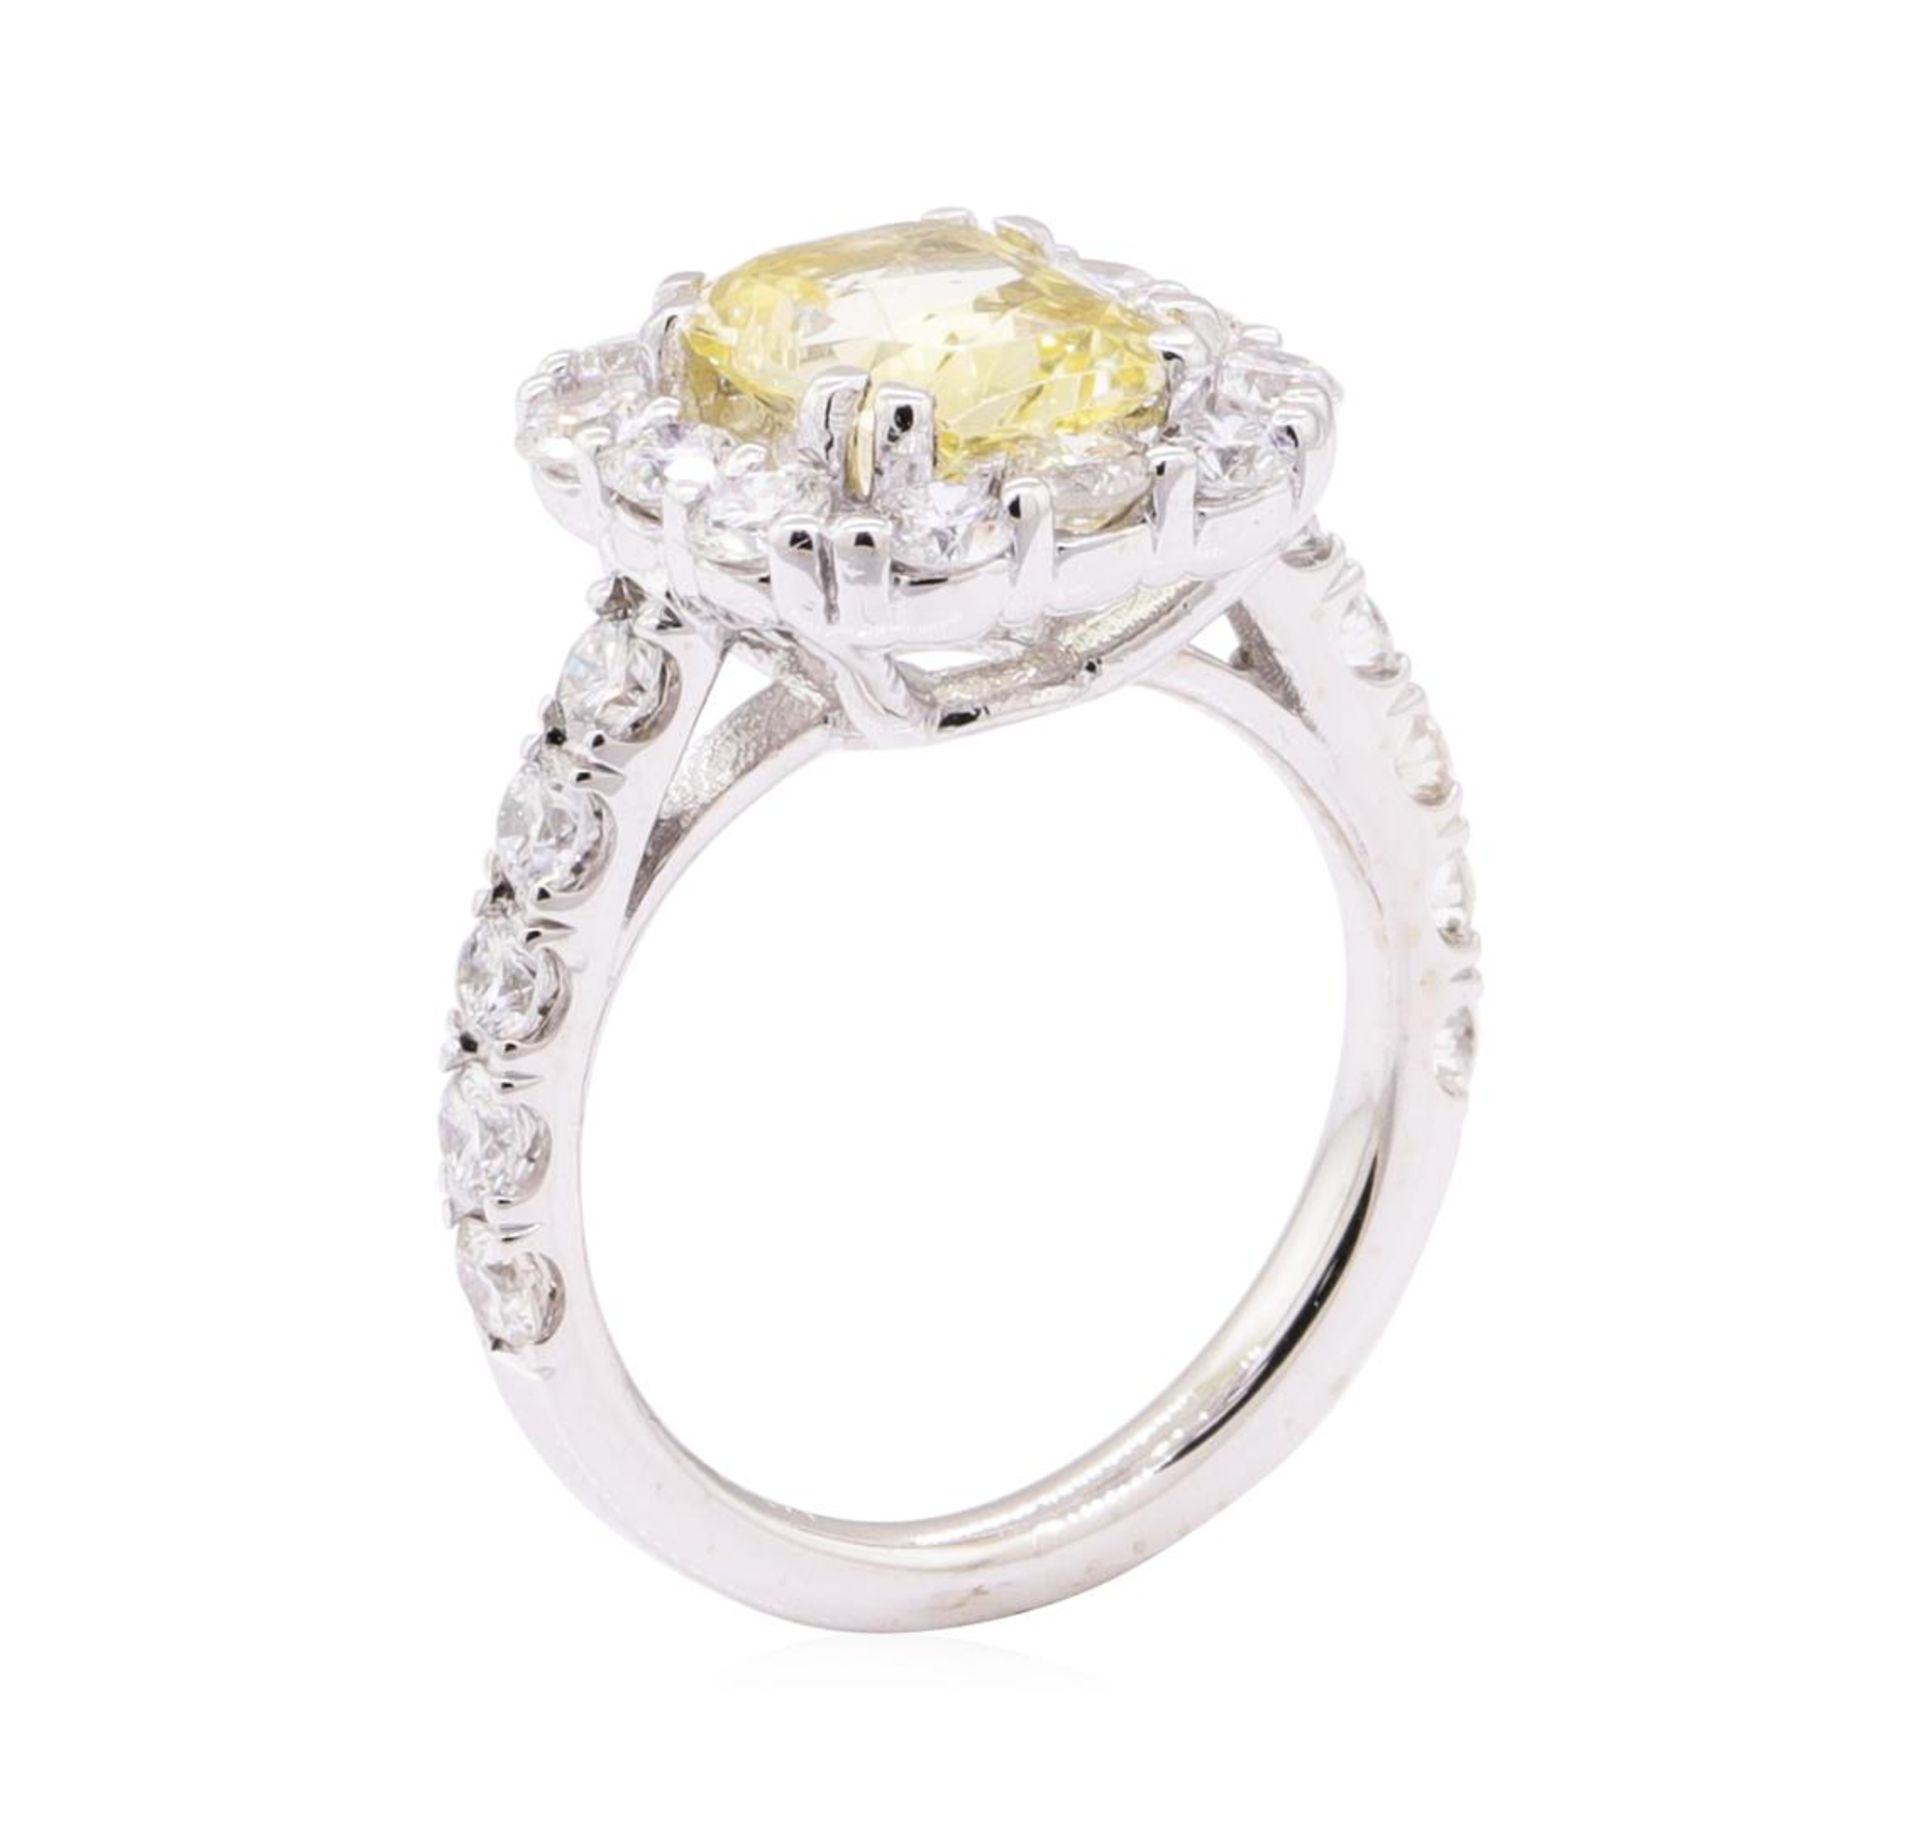 3.19 ctw Yellow Topaz And Diamond Ring - 18KT White Gold - Image 4 of 5